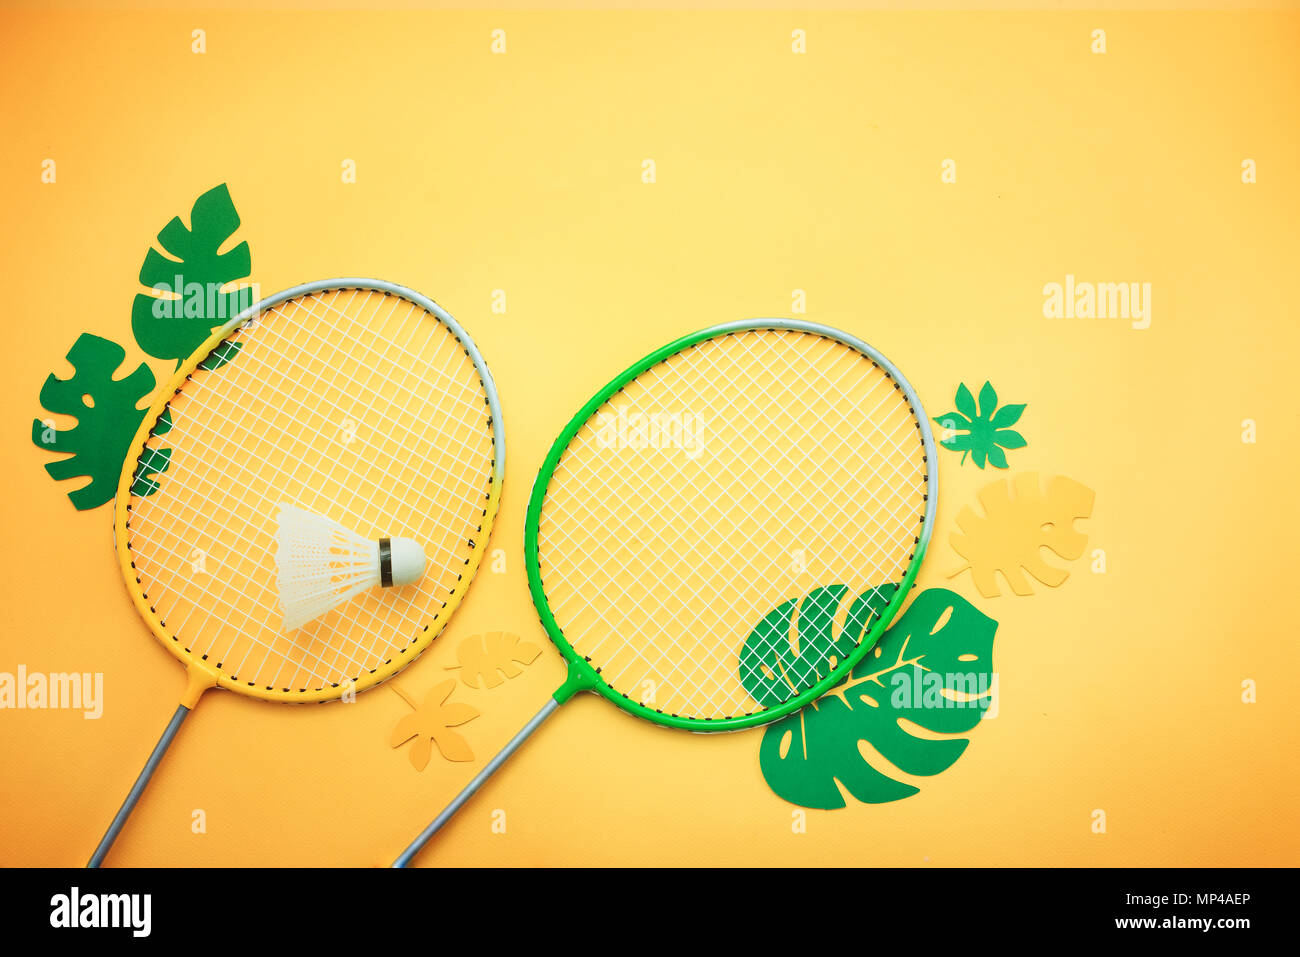 Badminton beach set. Summer activities flat lay with tropical leaves on a bright yellow background with copy space. Stock Photo